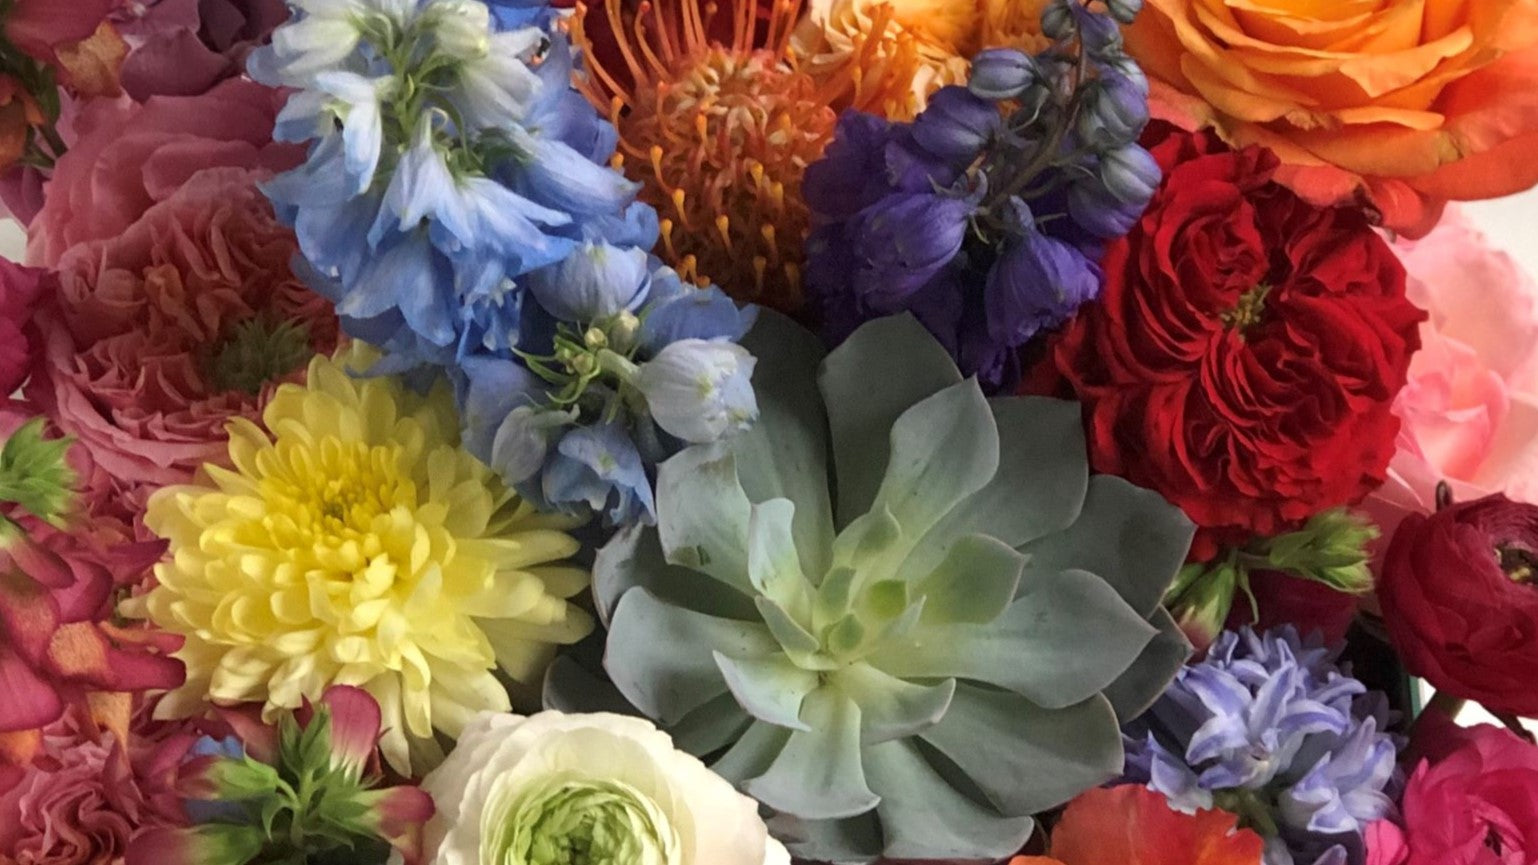 Congratulations header image of flowers and succulents